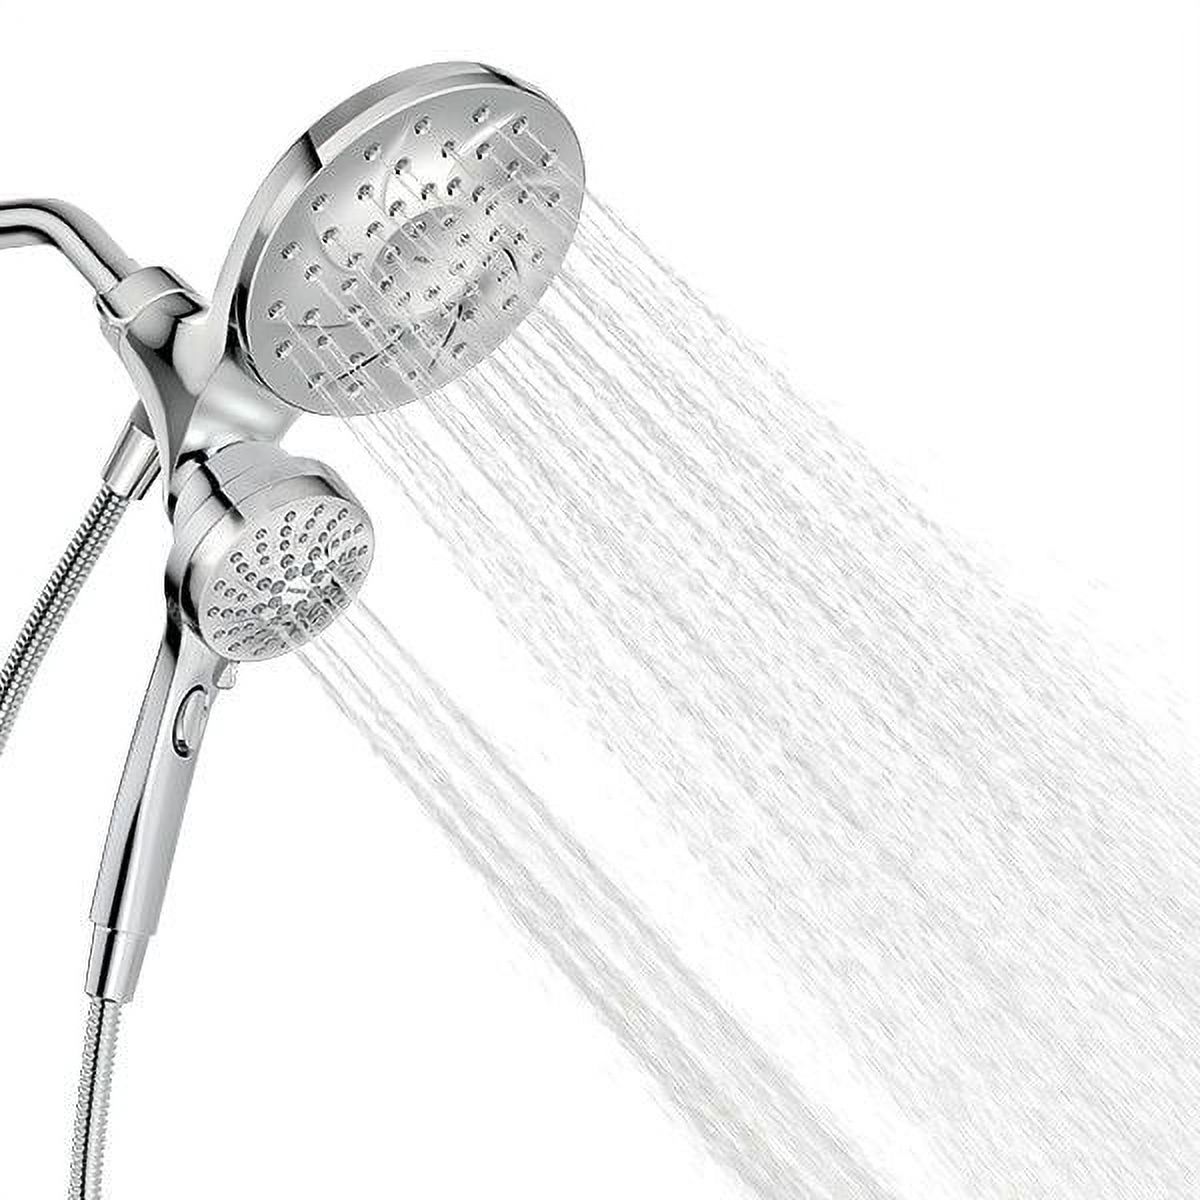 Moen Engage Magnetic 6.5" 6-Function Bathroom Handheld Showerhead with Magnetic Docking, Chrome - image 2 of 29